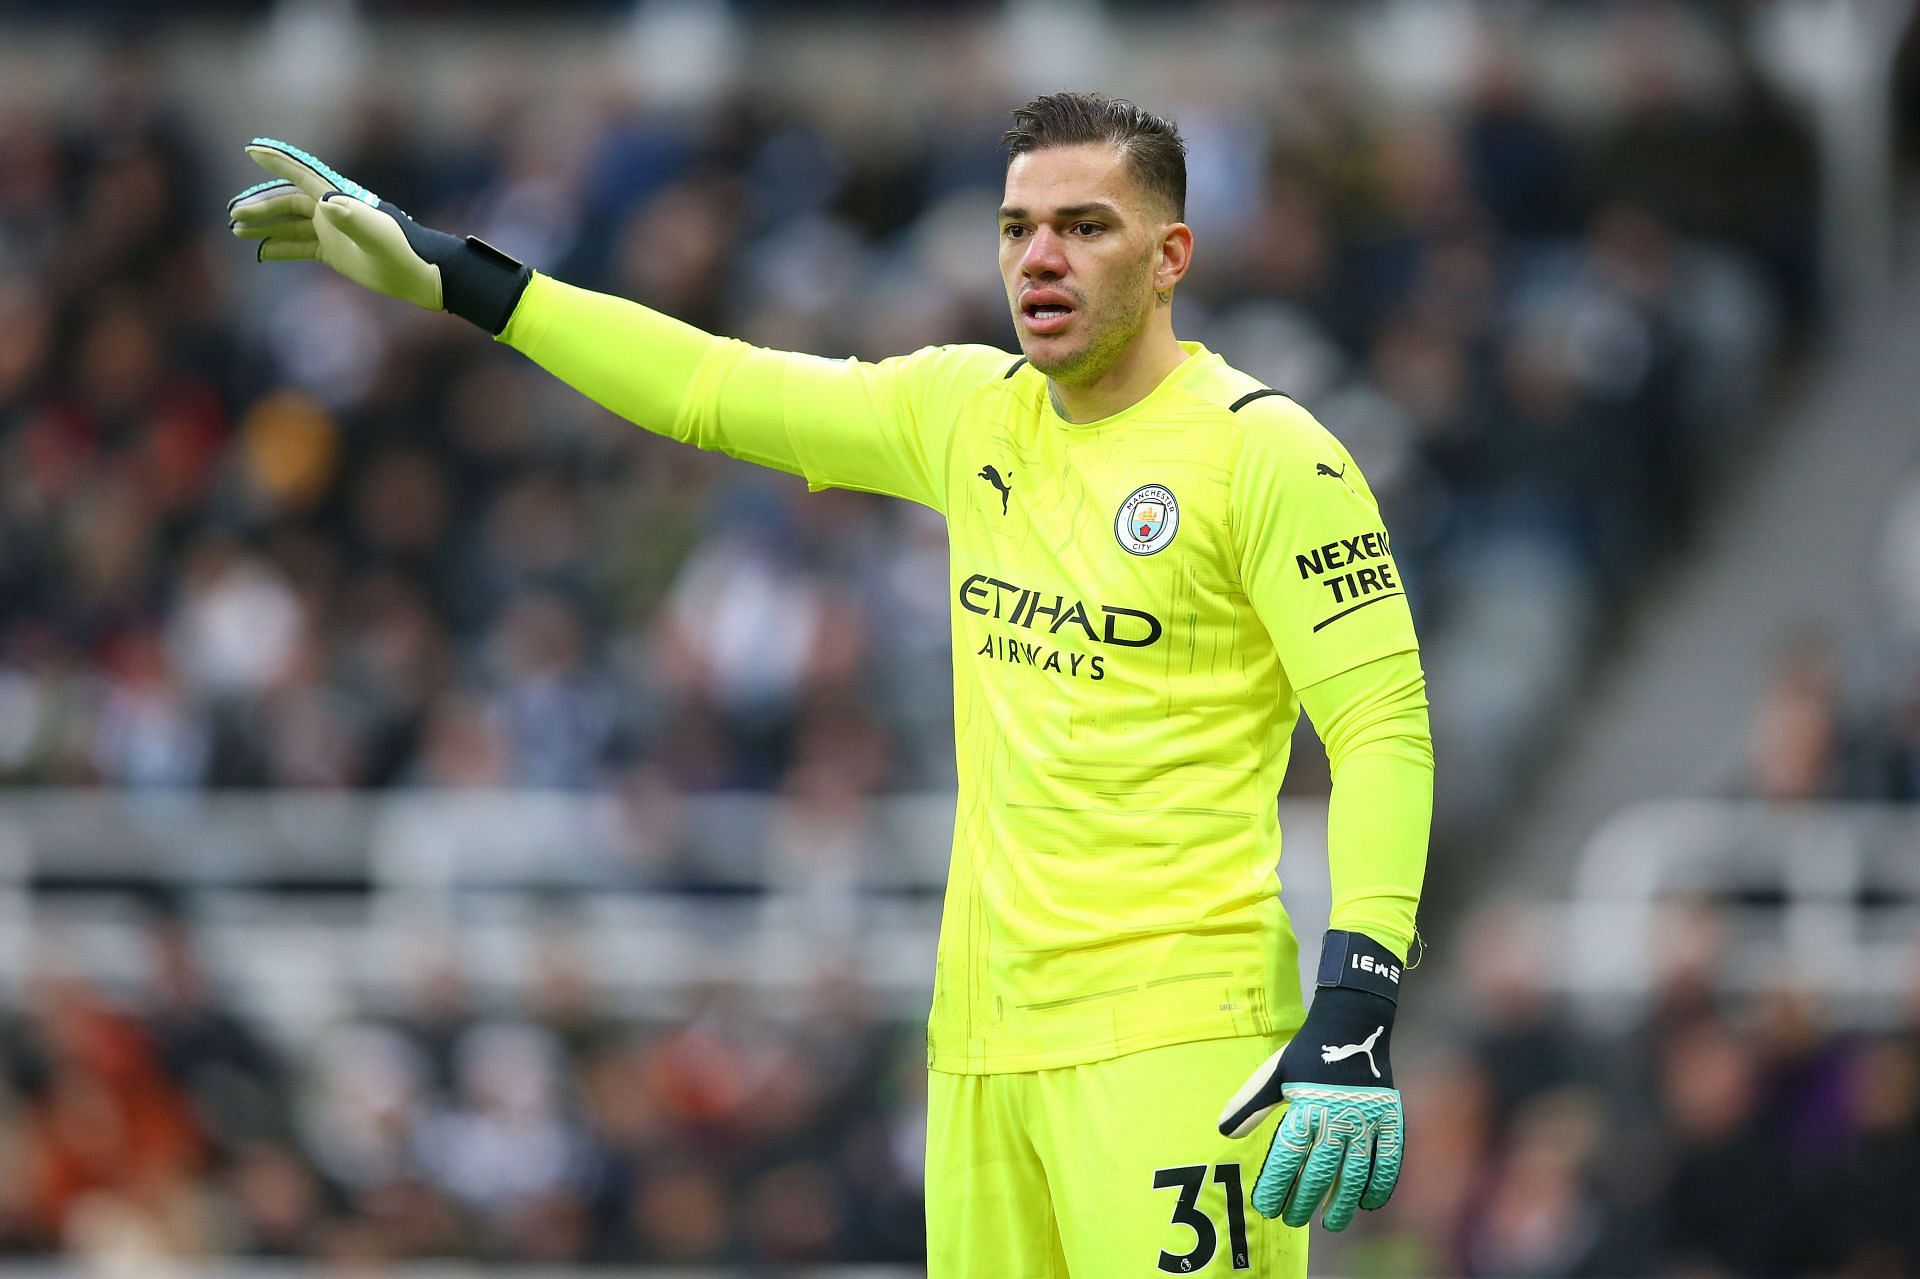 Ederson has set a standard that not everyone can achieve